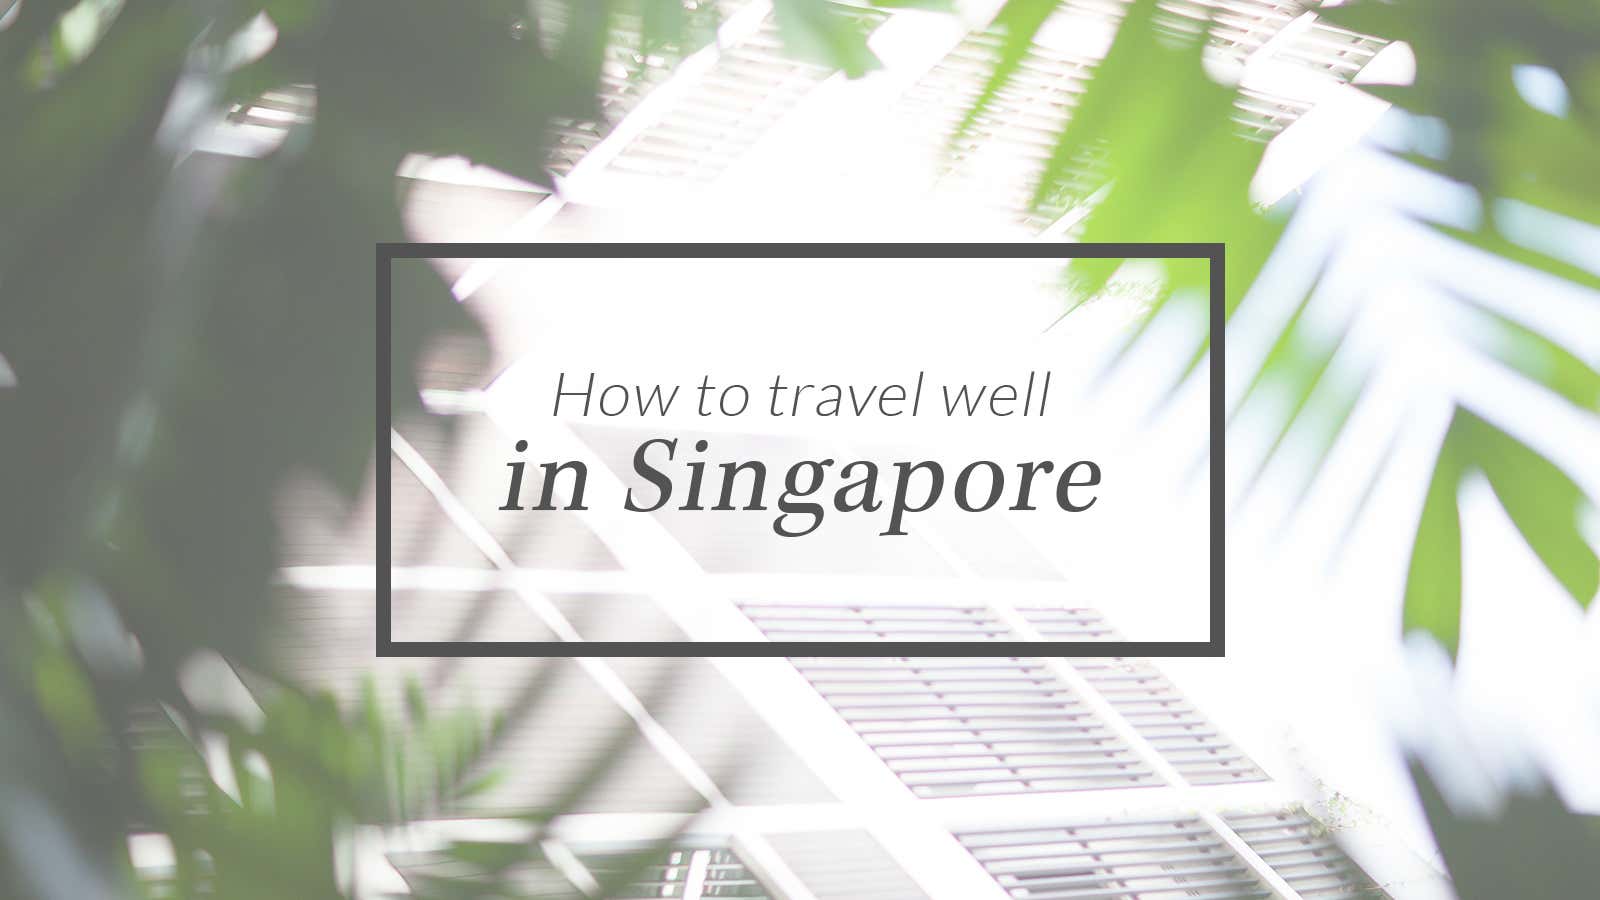 How business travellers can experience the cultural riches of Singapore